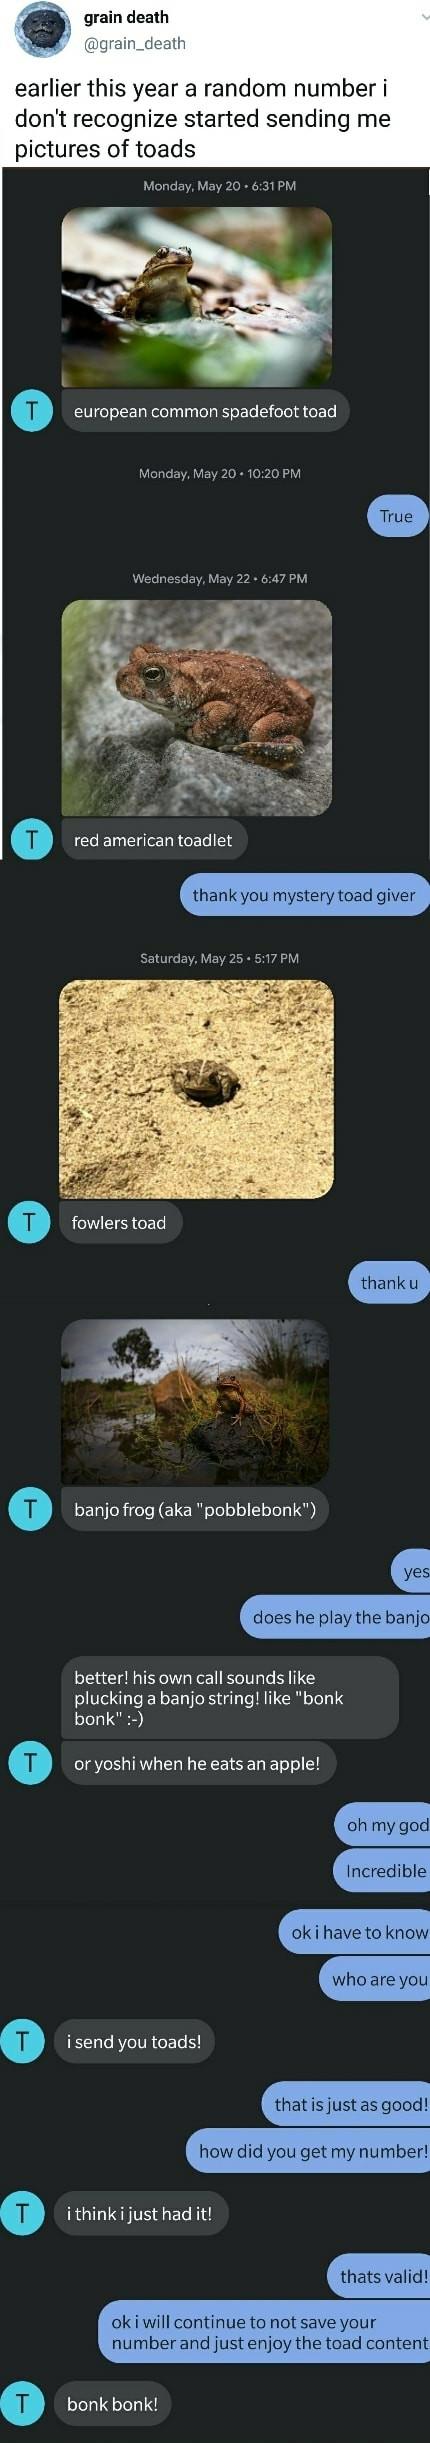 Bless the toad man.